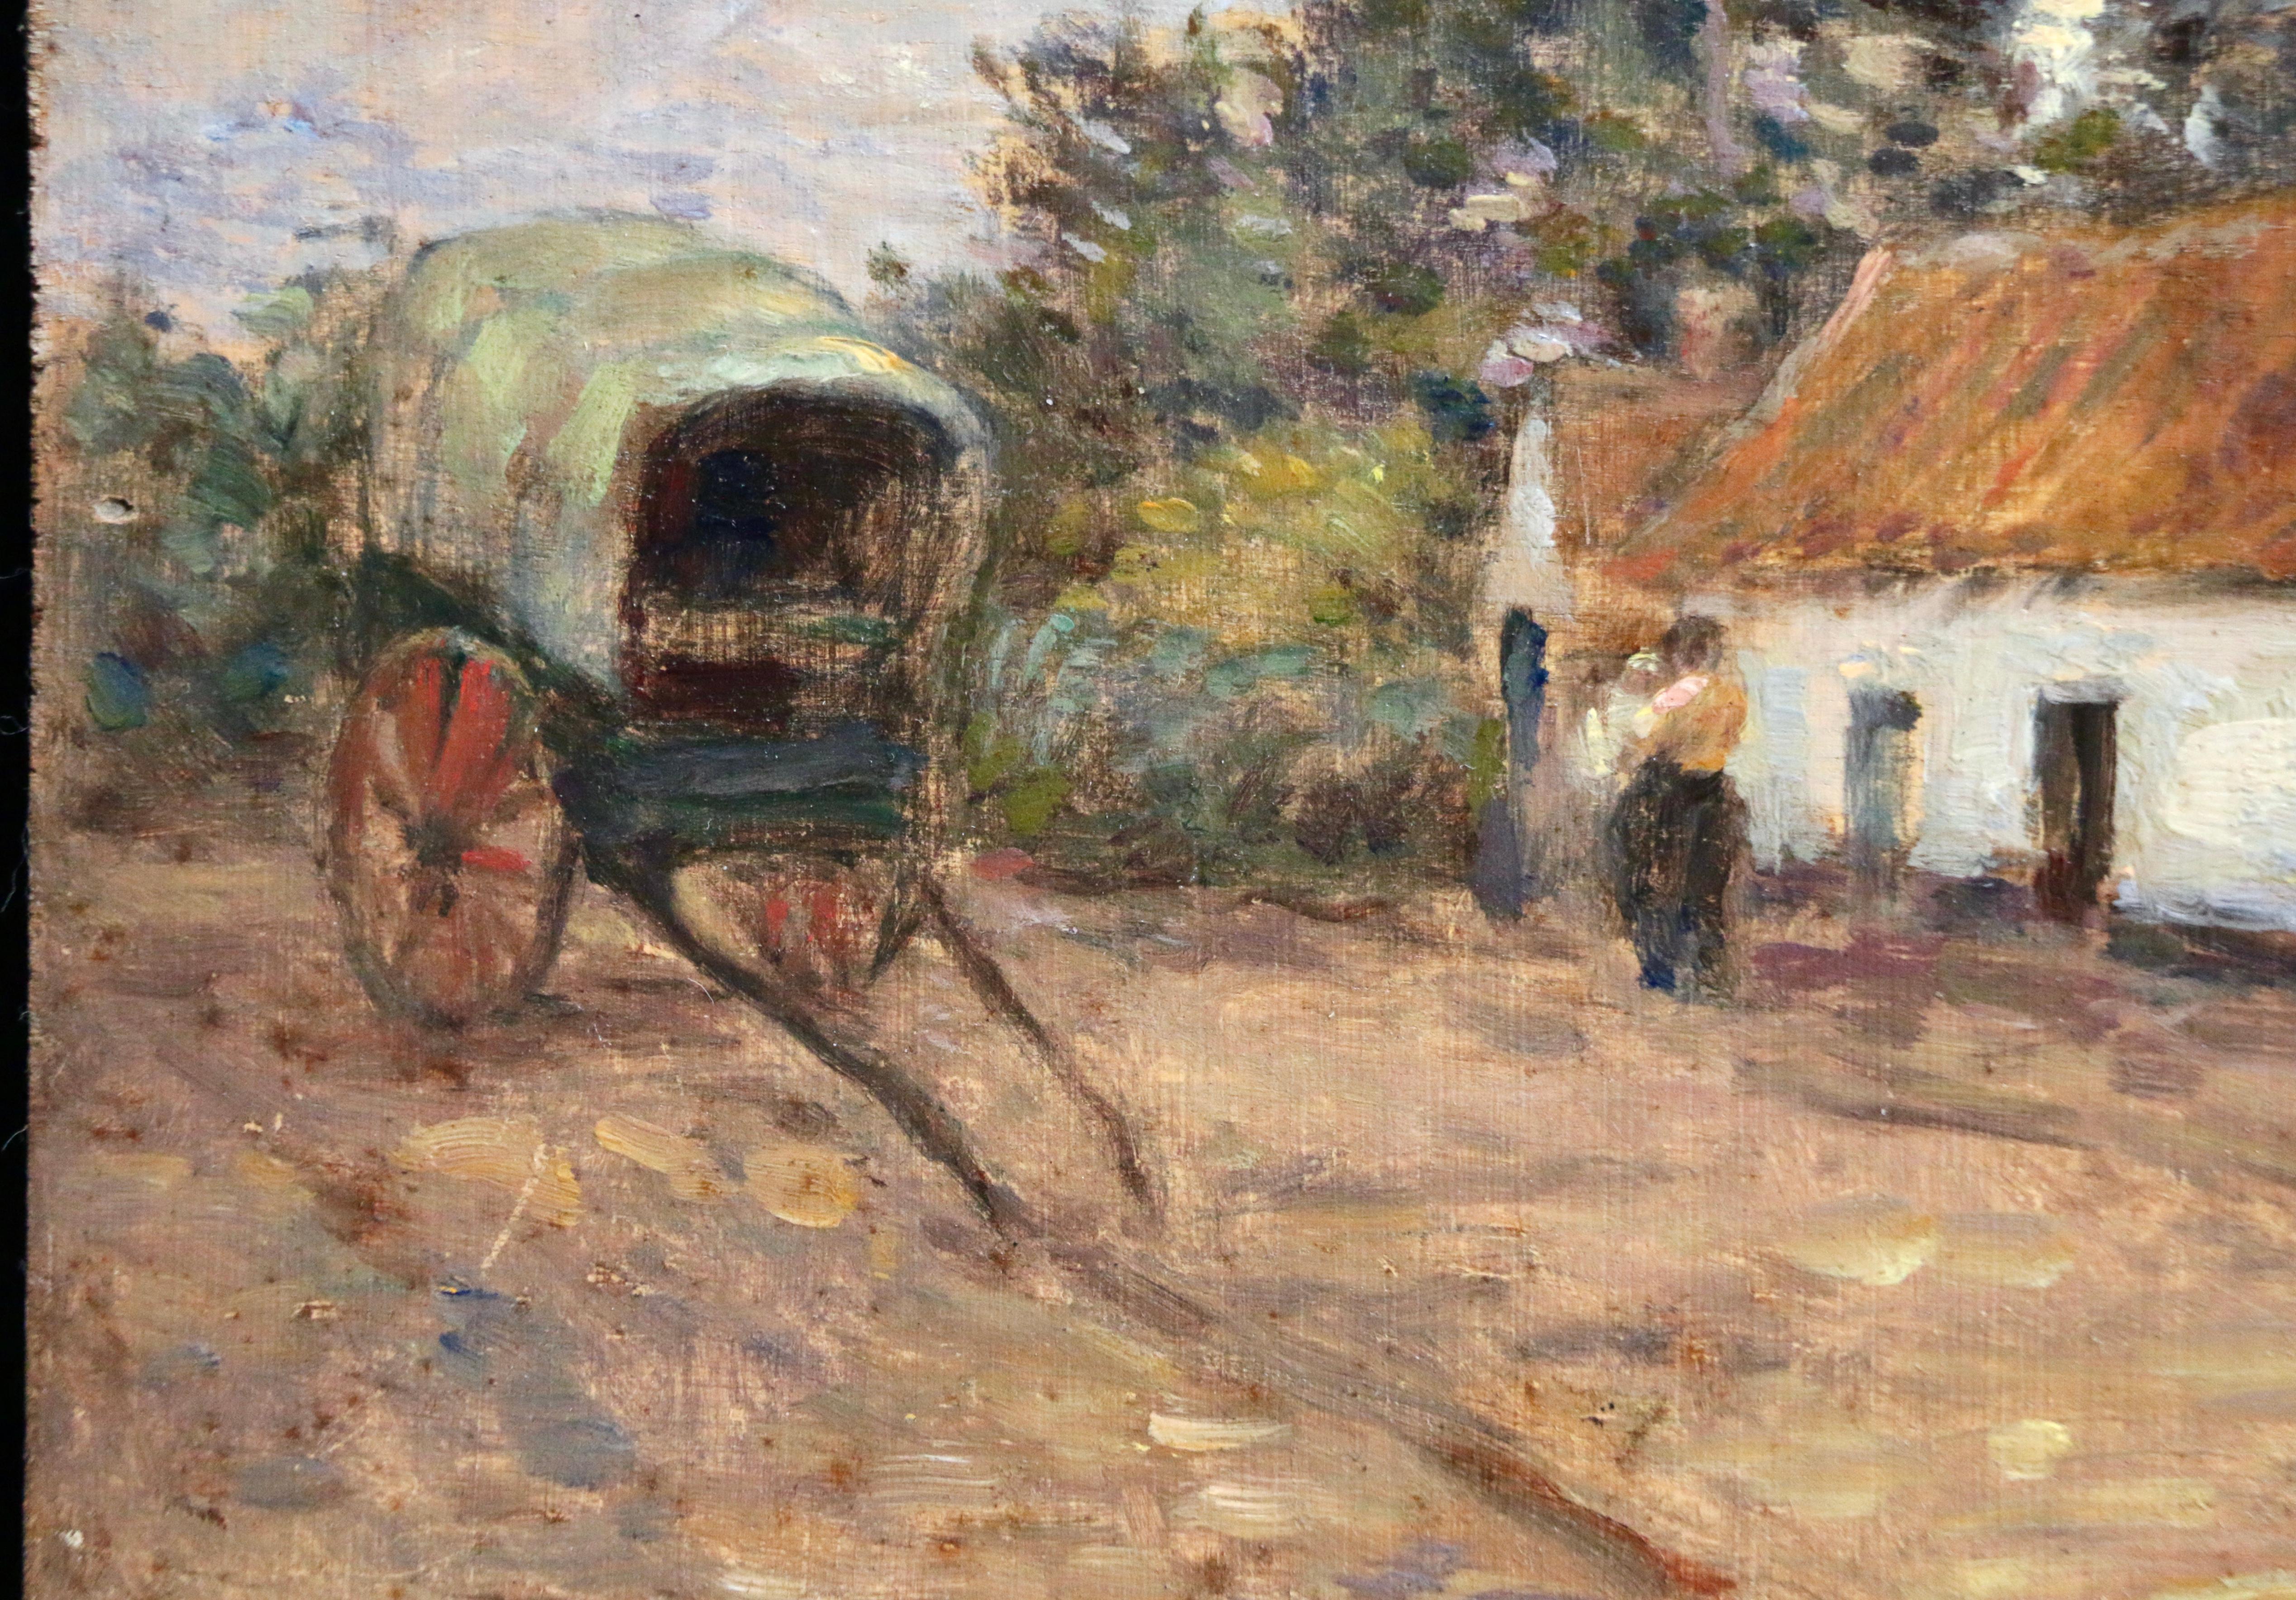 A wonderful oil on panel circa 1905 by French impressionist painter Marie Duhem. The work depicts a mother holding her baby outside a white farm house. Beside them is a traditional cart. 

Signature:
Signed lower left 

Dimensions:
Unframed: